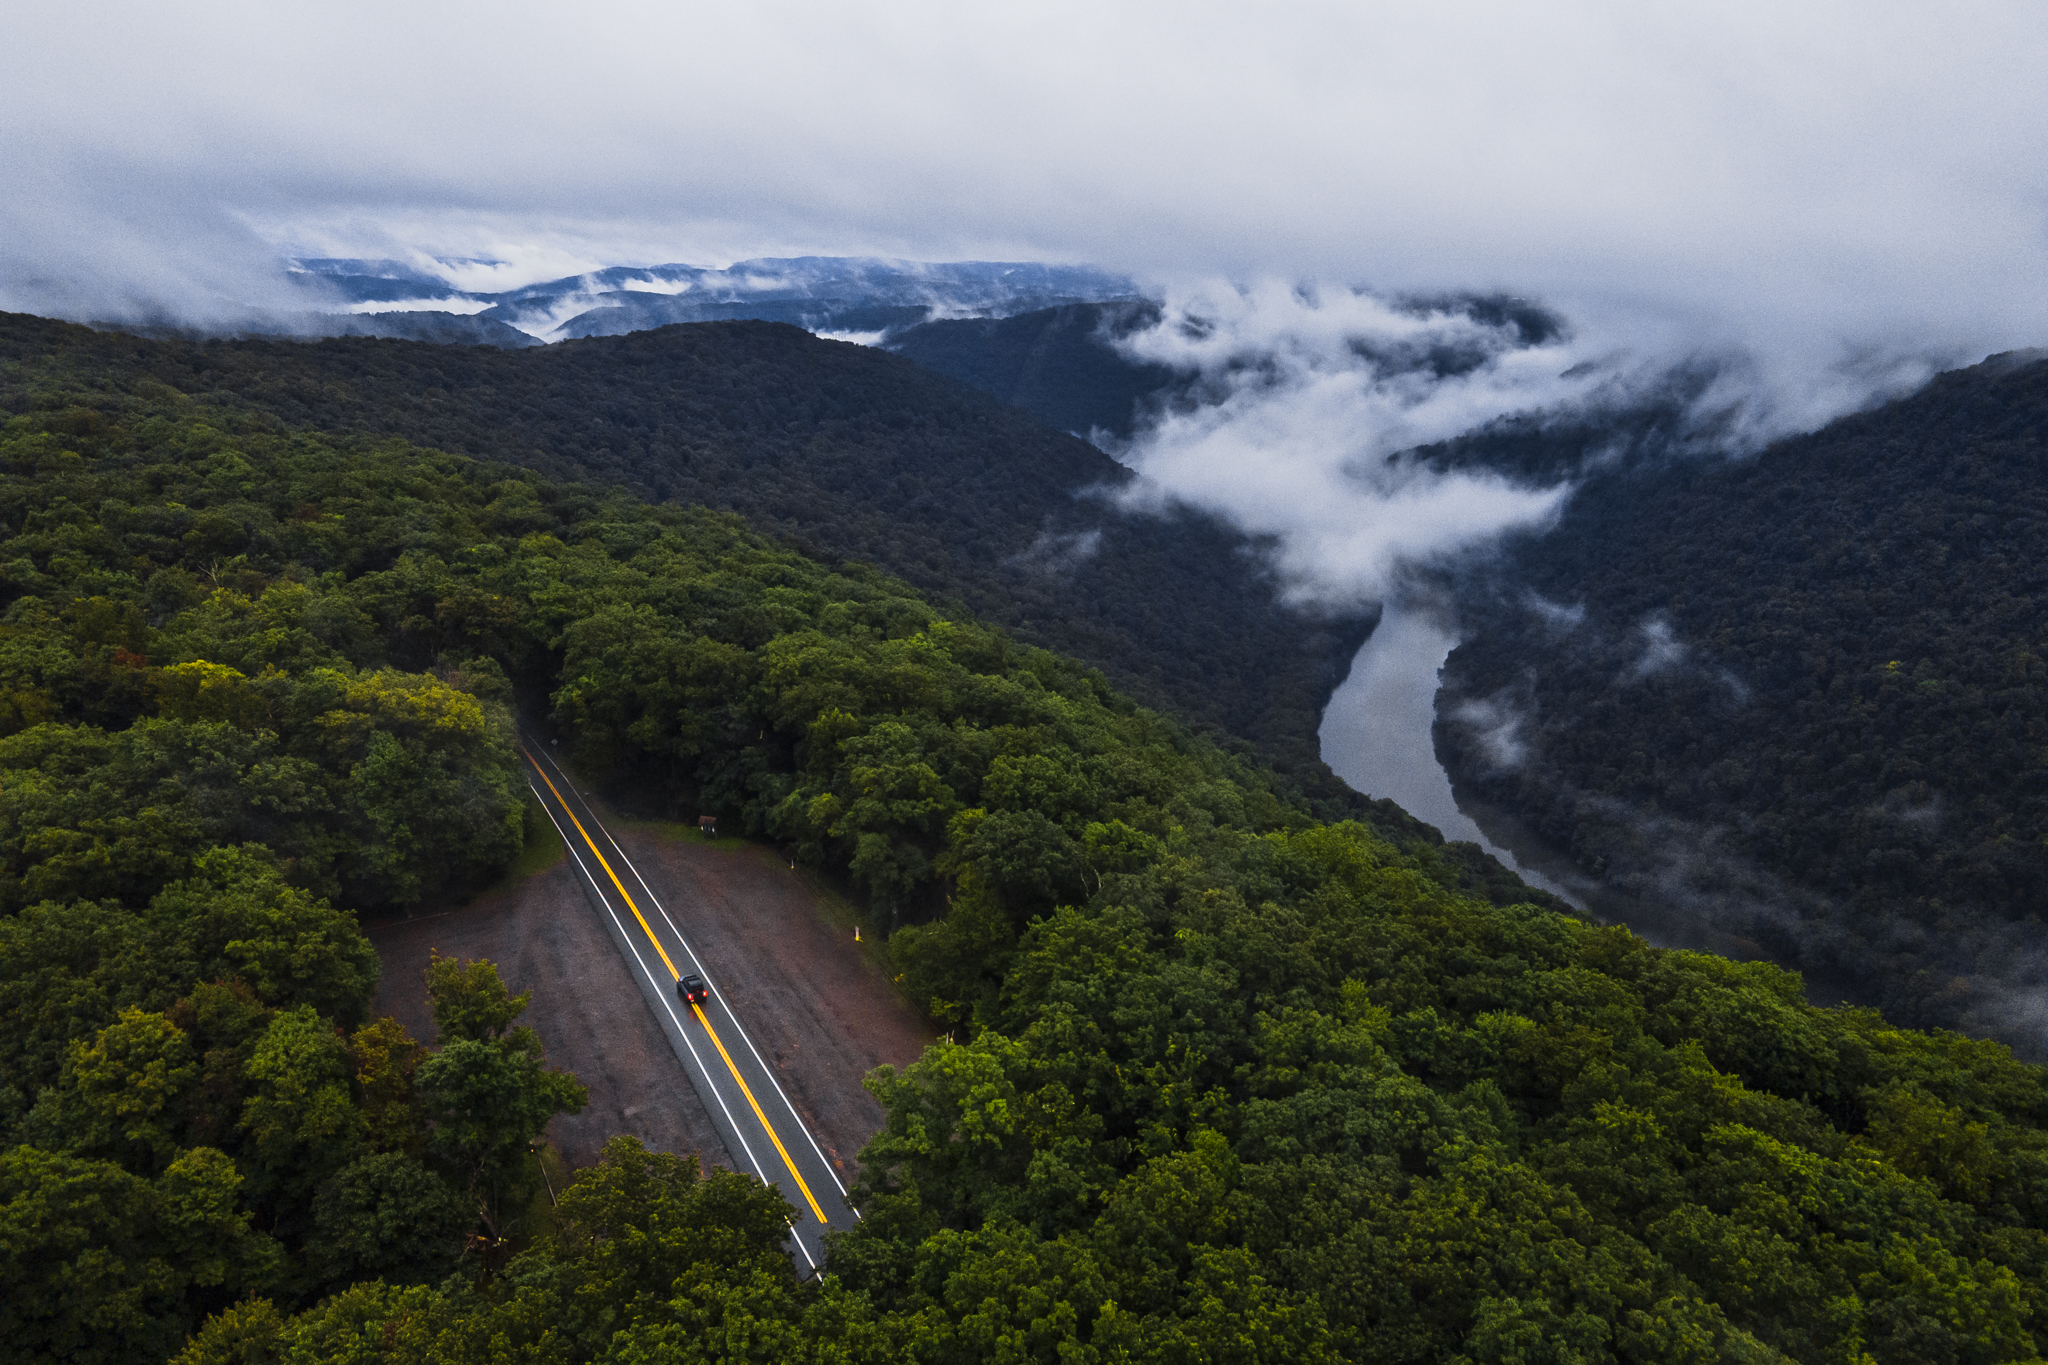 Ford Bronco Bronco Imagery from Stop at Coopers Rock, WV DJI_0167